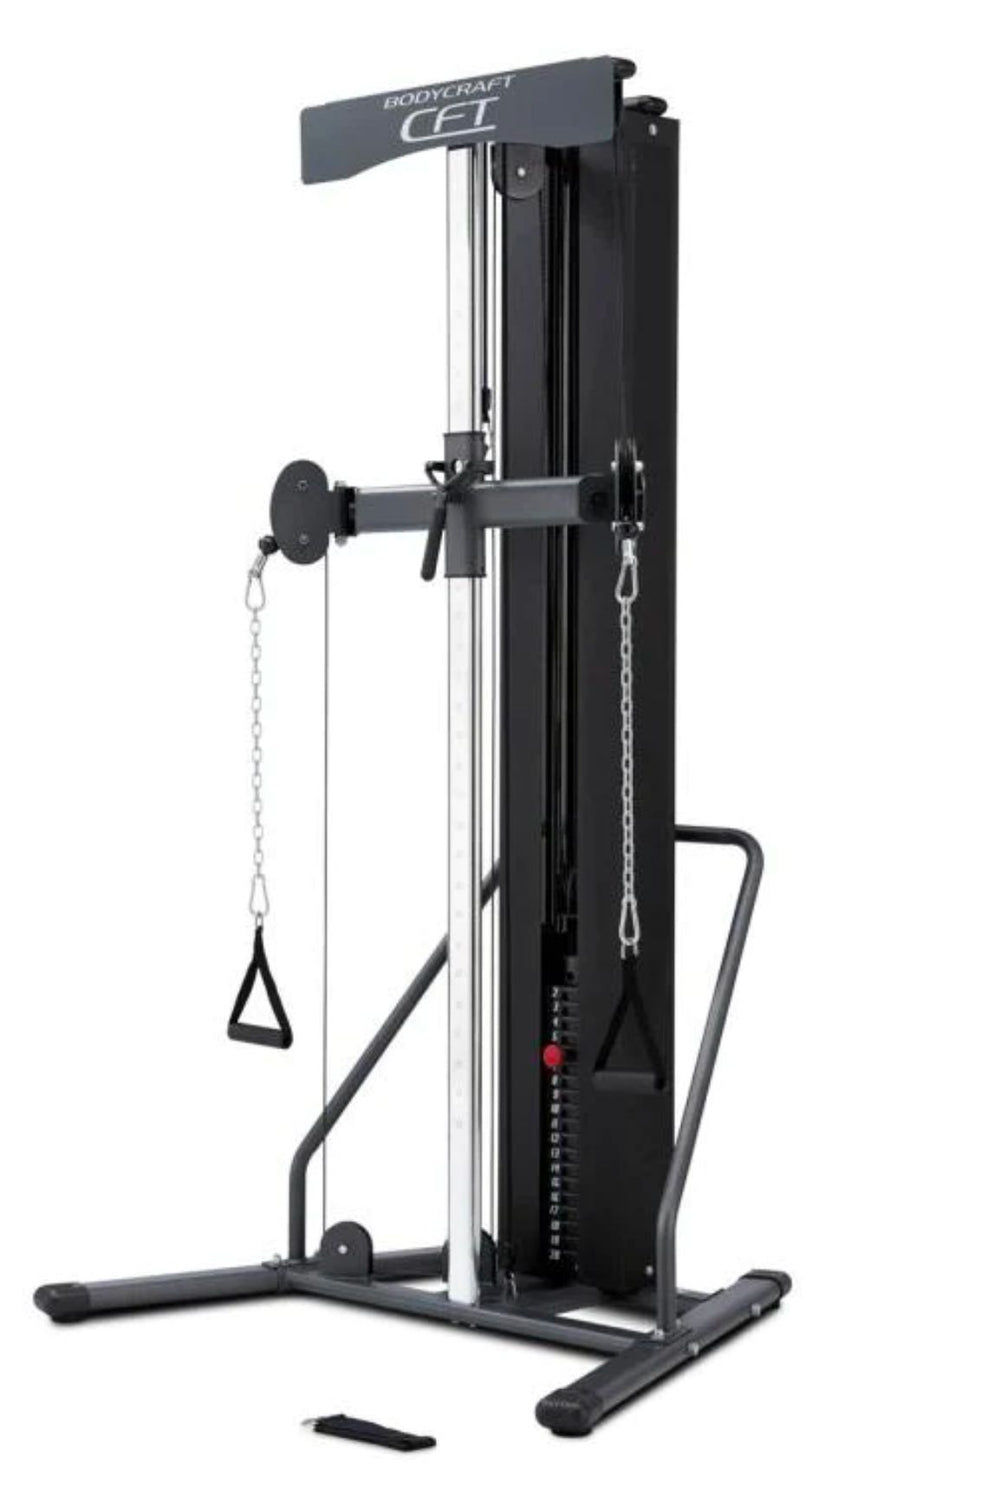 Black and grey functional cable trainer